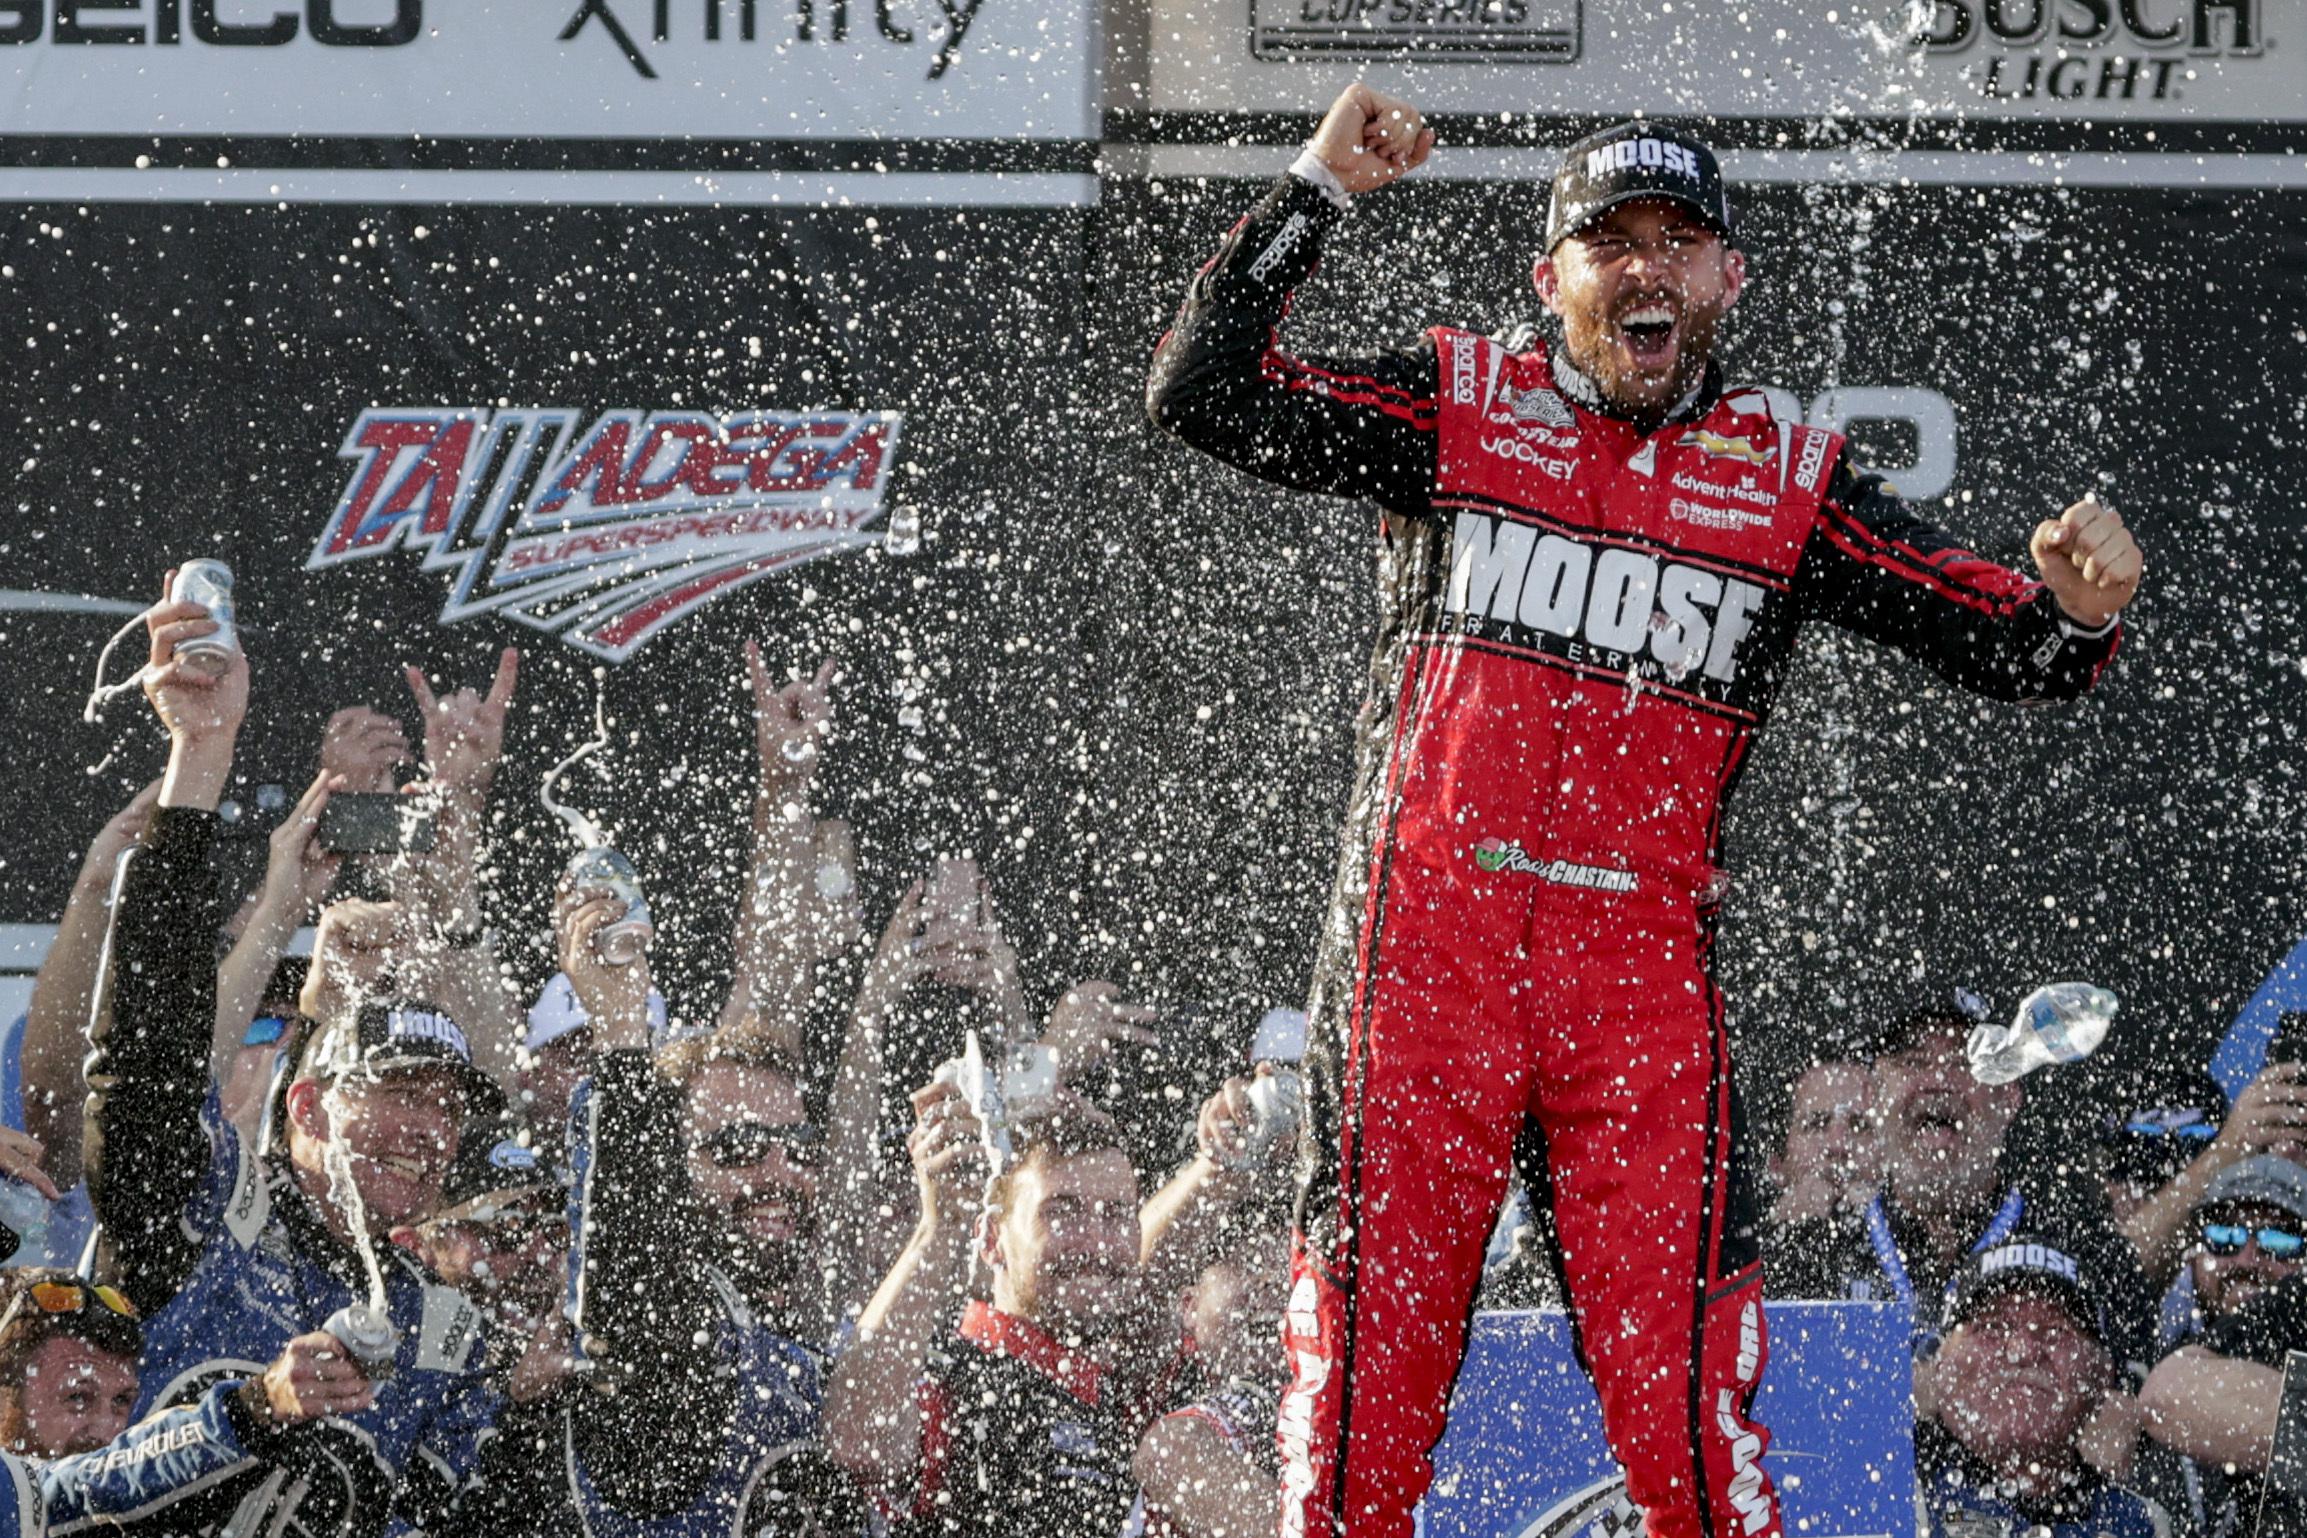 Ross Chastain steals victory at Talladega Superspeedway | AP News